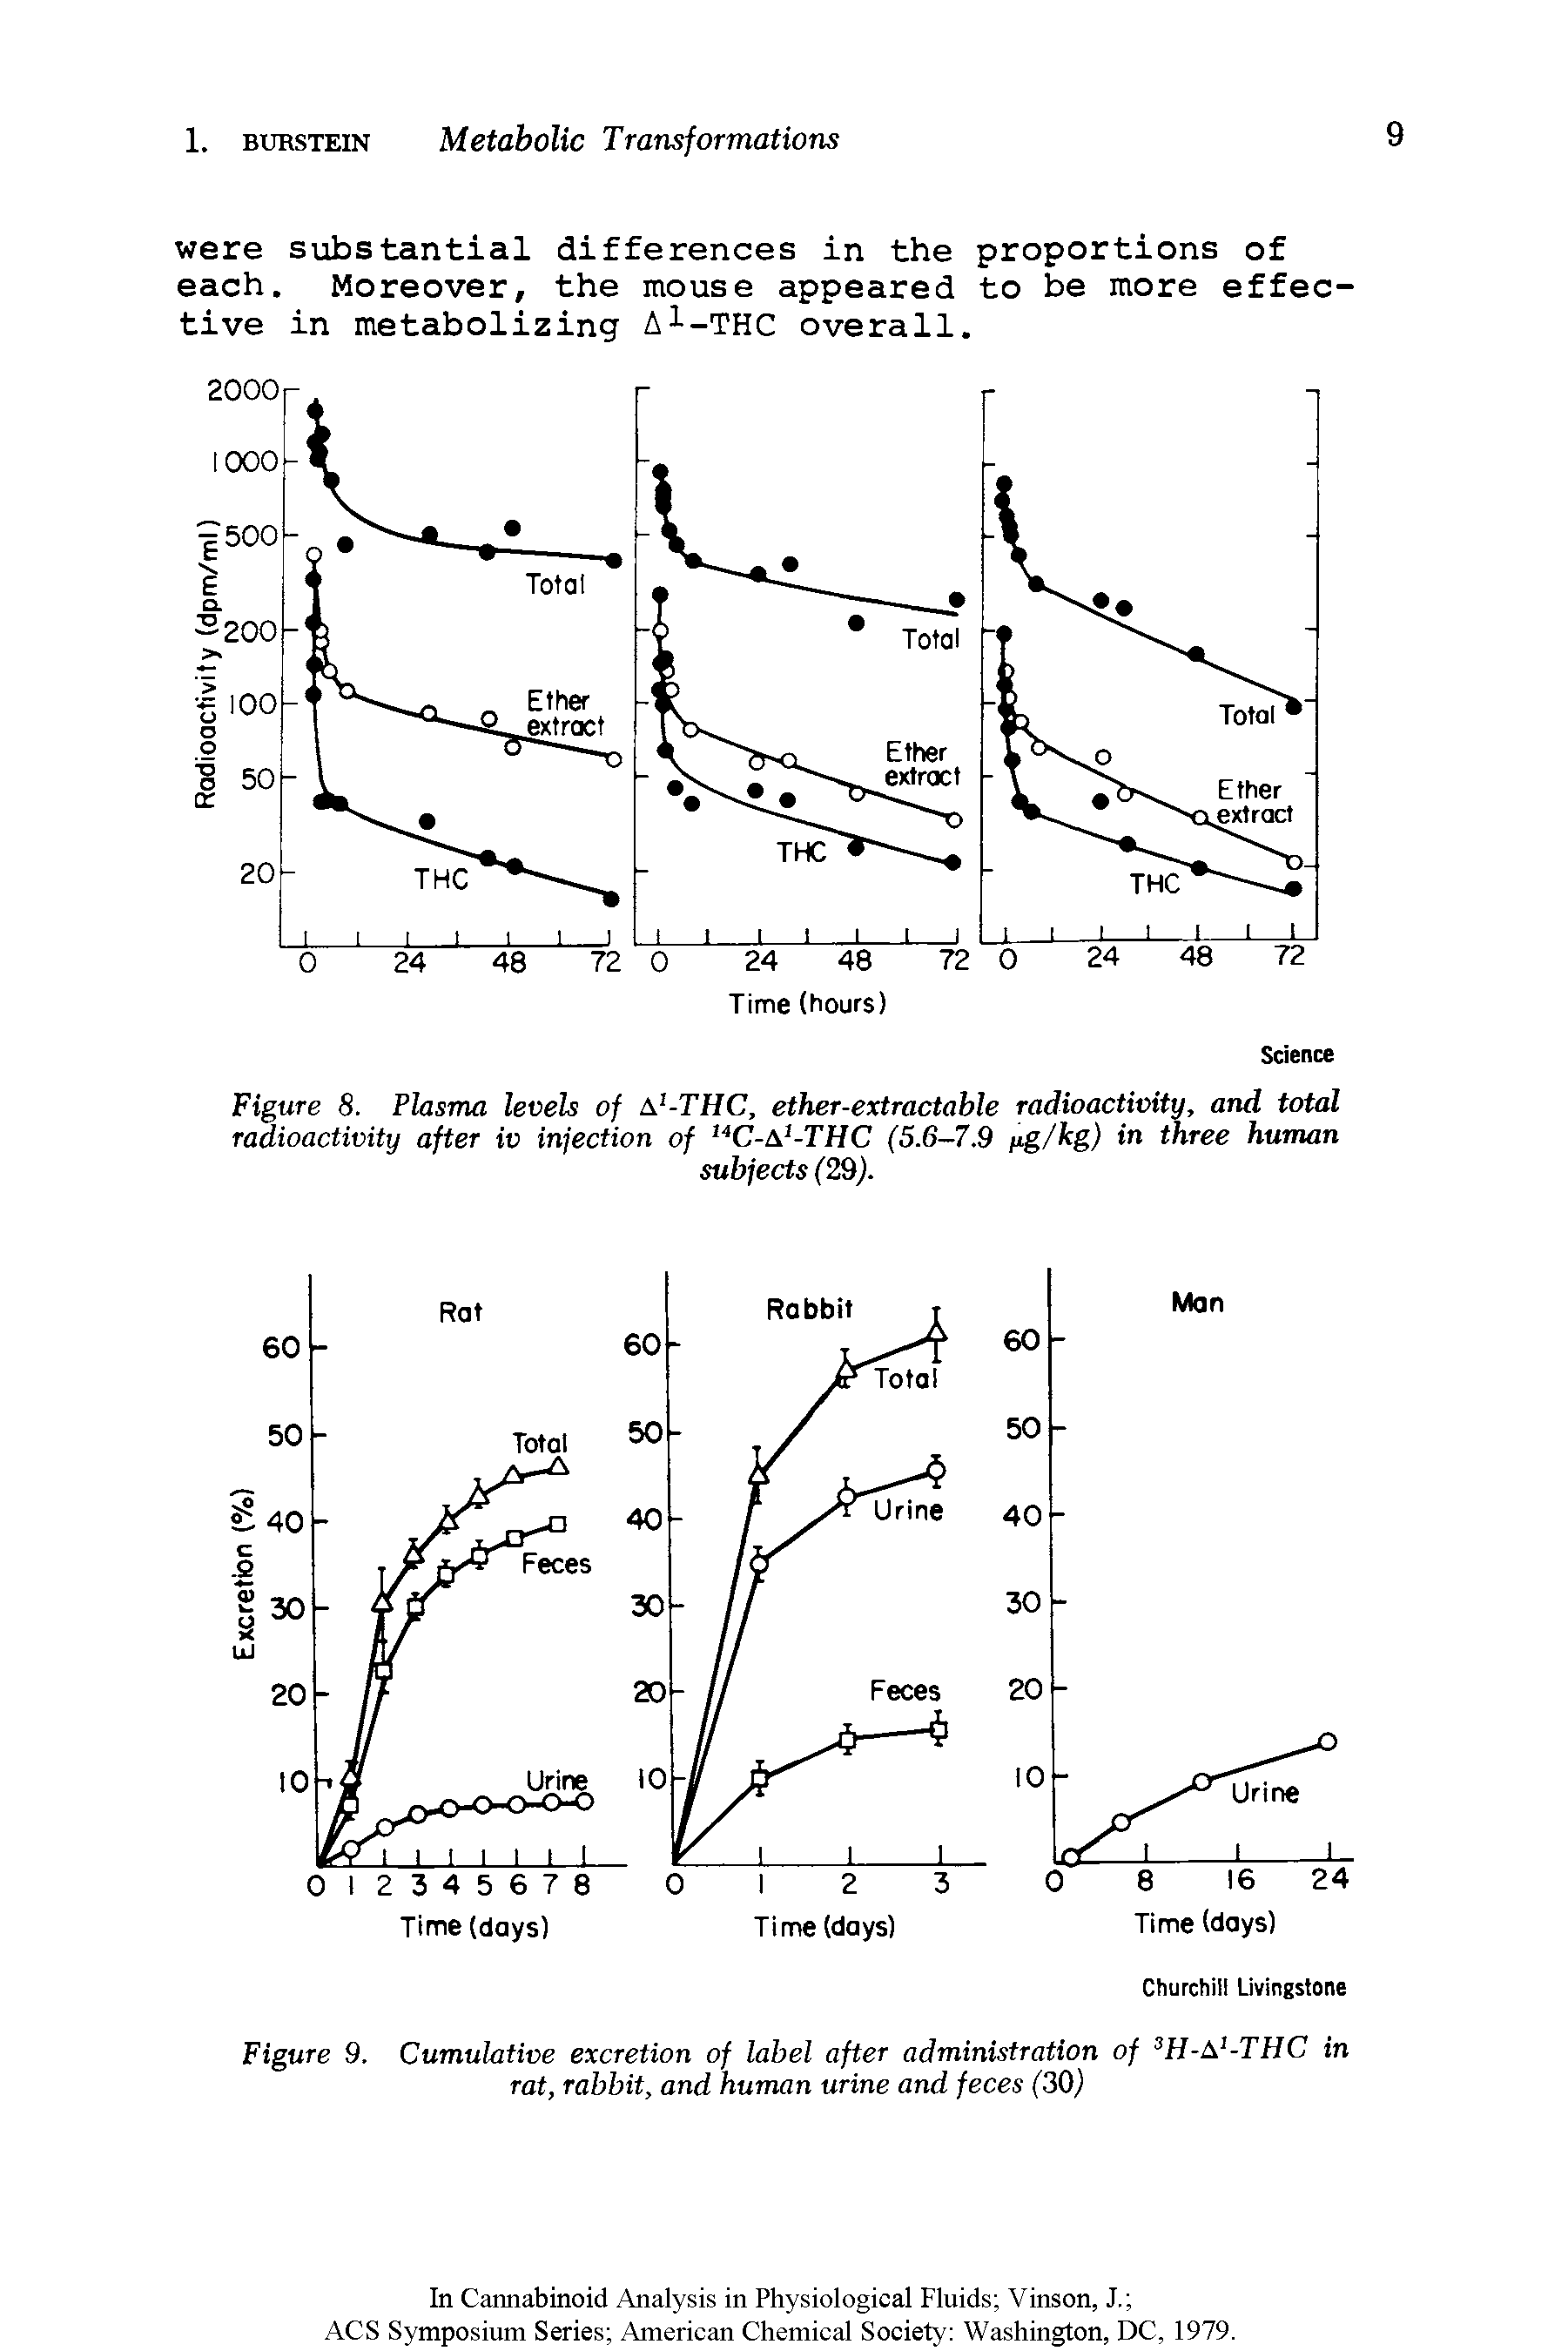 Figure 9. Cumulative excretion of label after administration of 3H-tx -THC in rat, rabbit, and human urine and feces (30)...